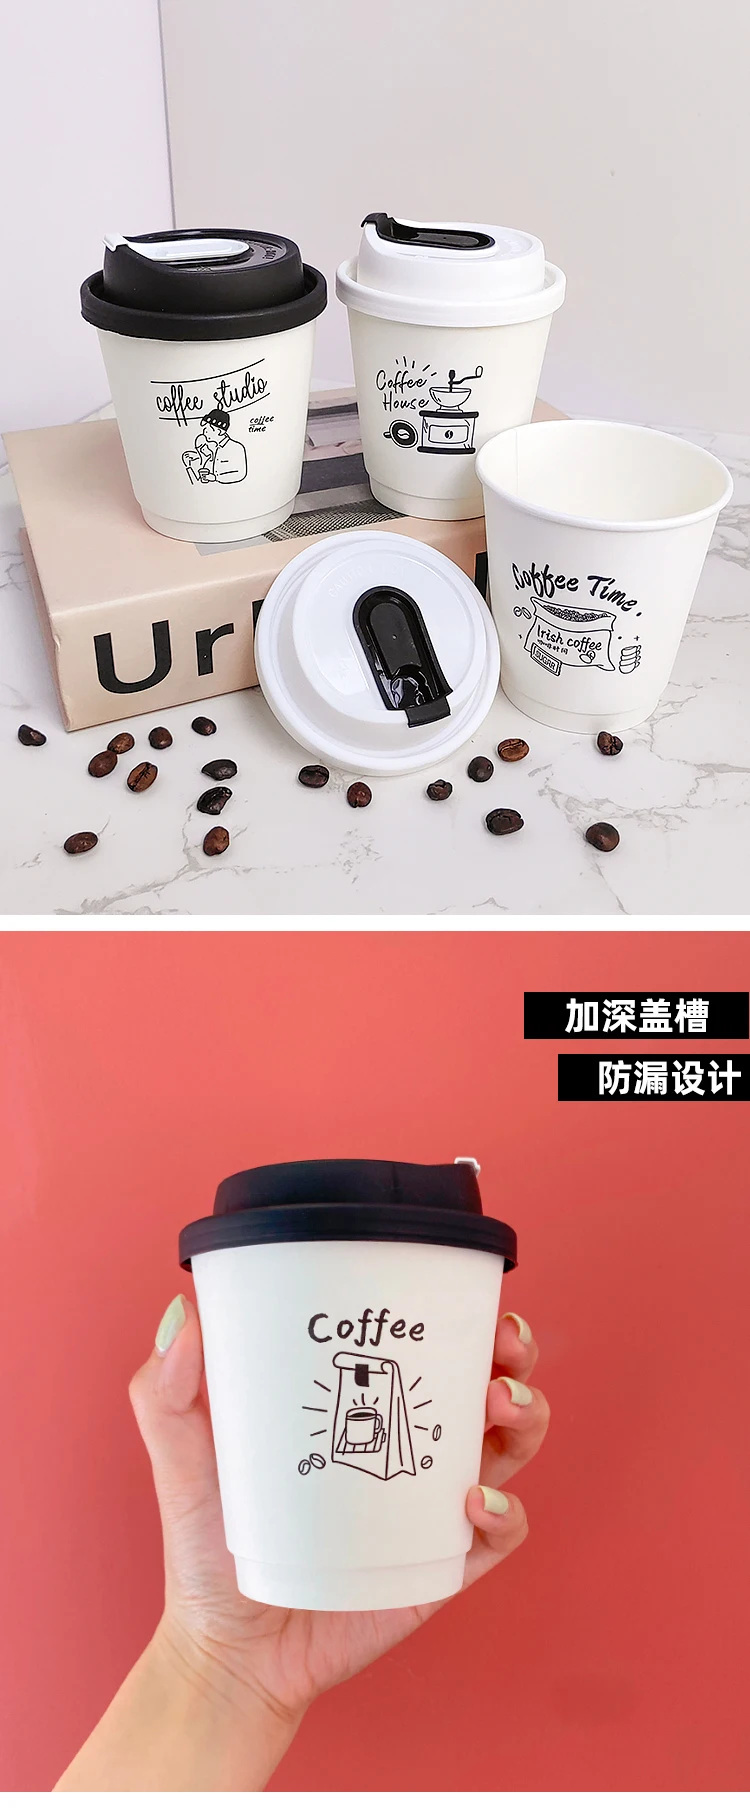 50pcs High Quality Coffee Cup Disposable Cups Milk Tea Soy Packaging Cups  8oz 280ml 10oz 330ml Drinking Double Thick Paper Cup - Disposable Cups -  AliExpress